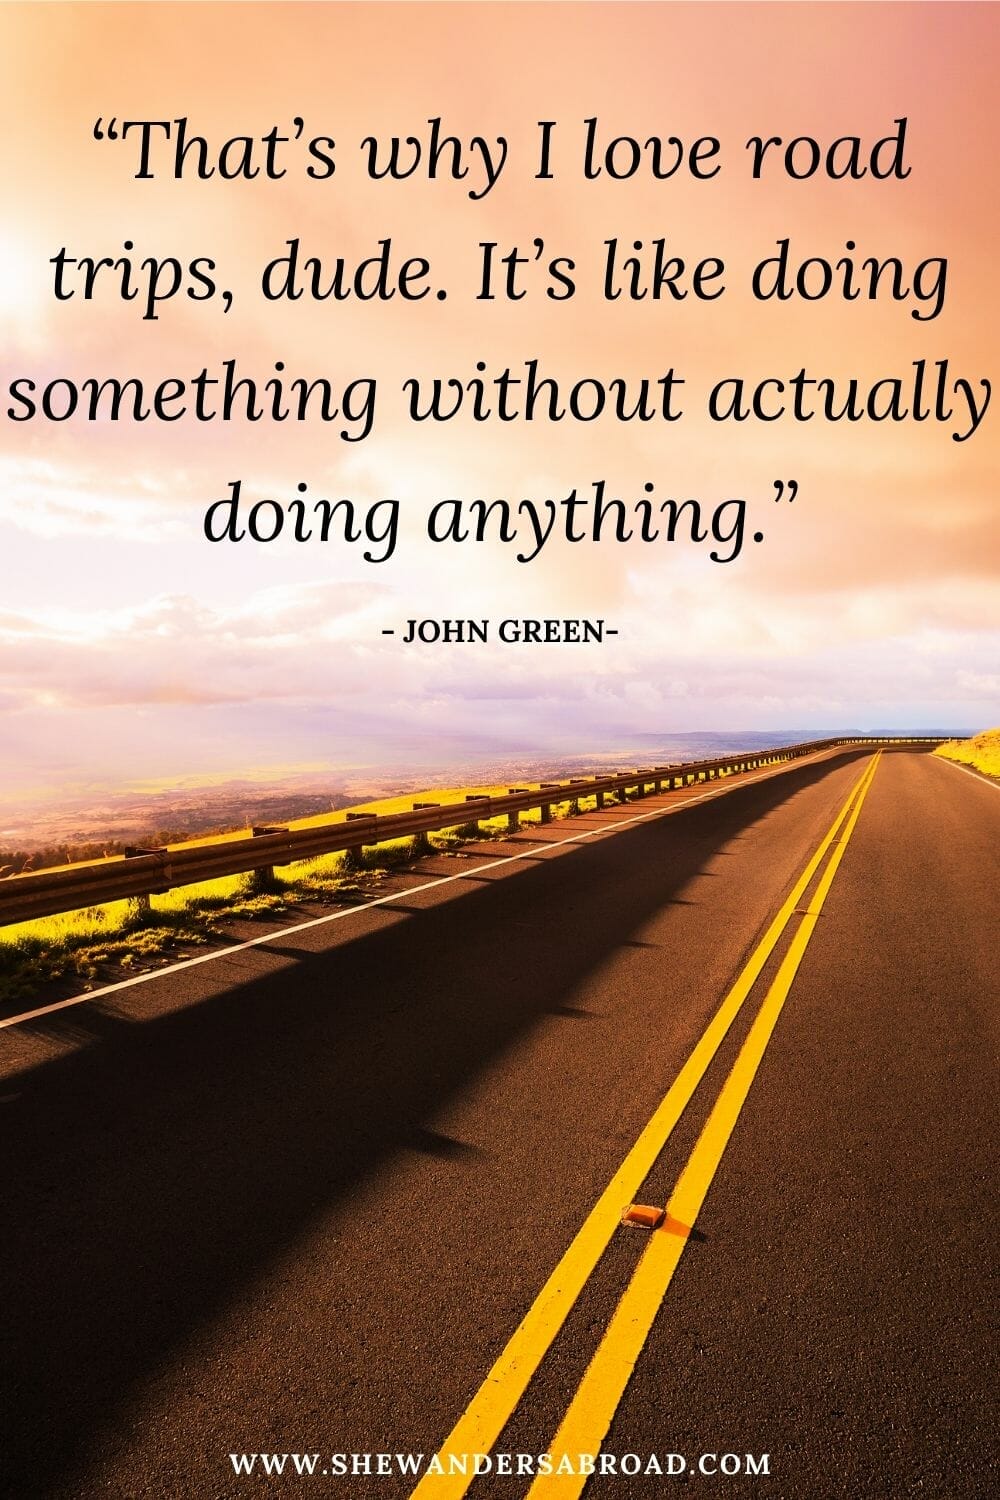 Road trip with friends quotes